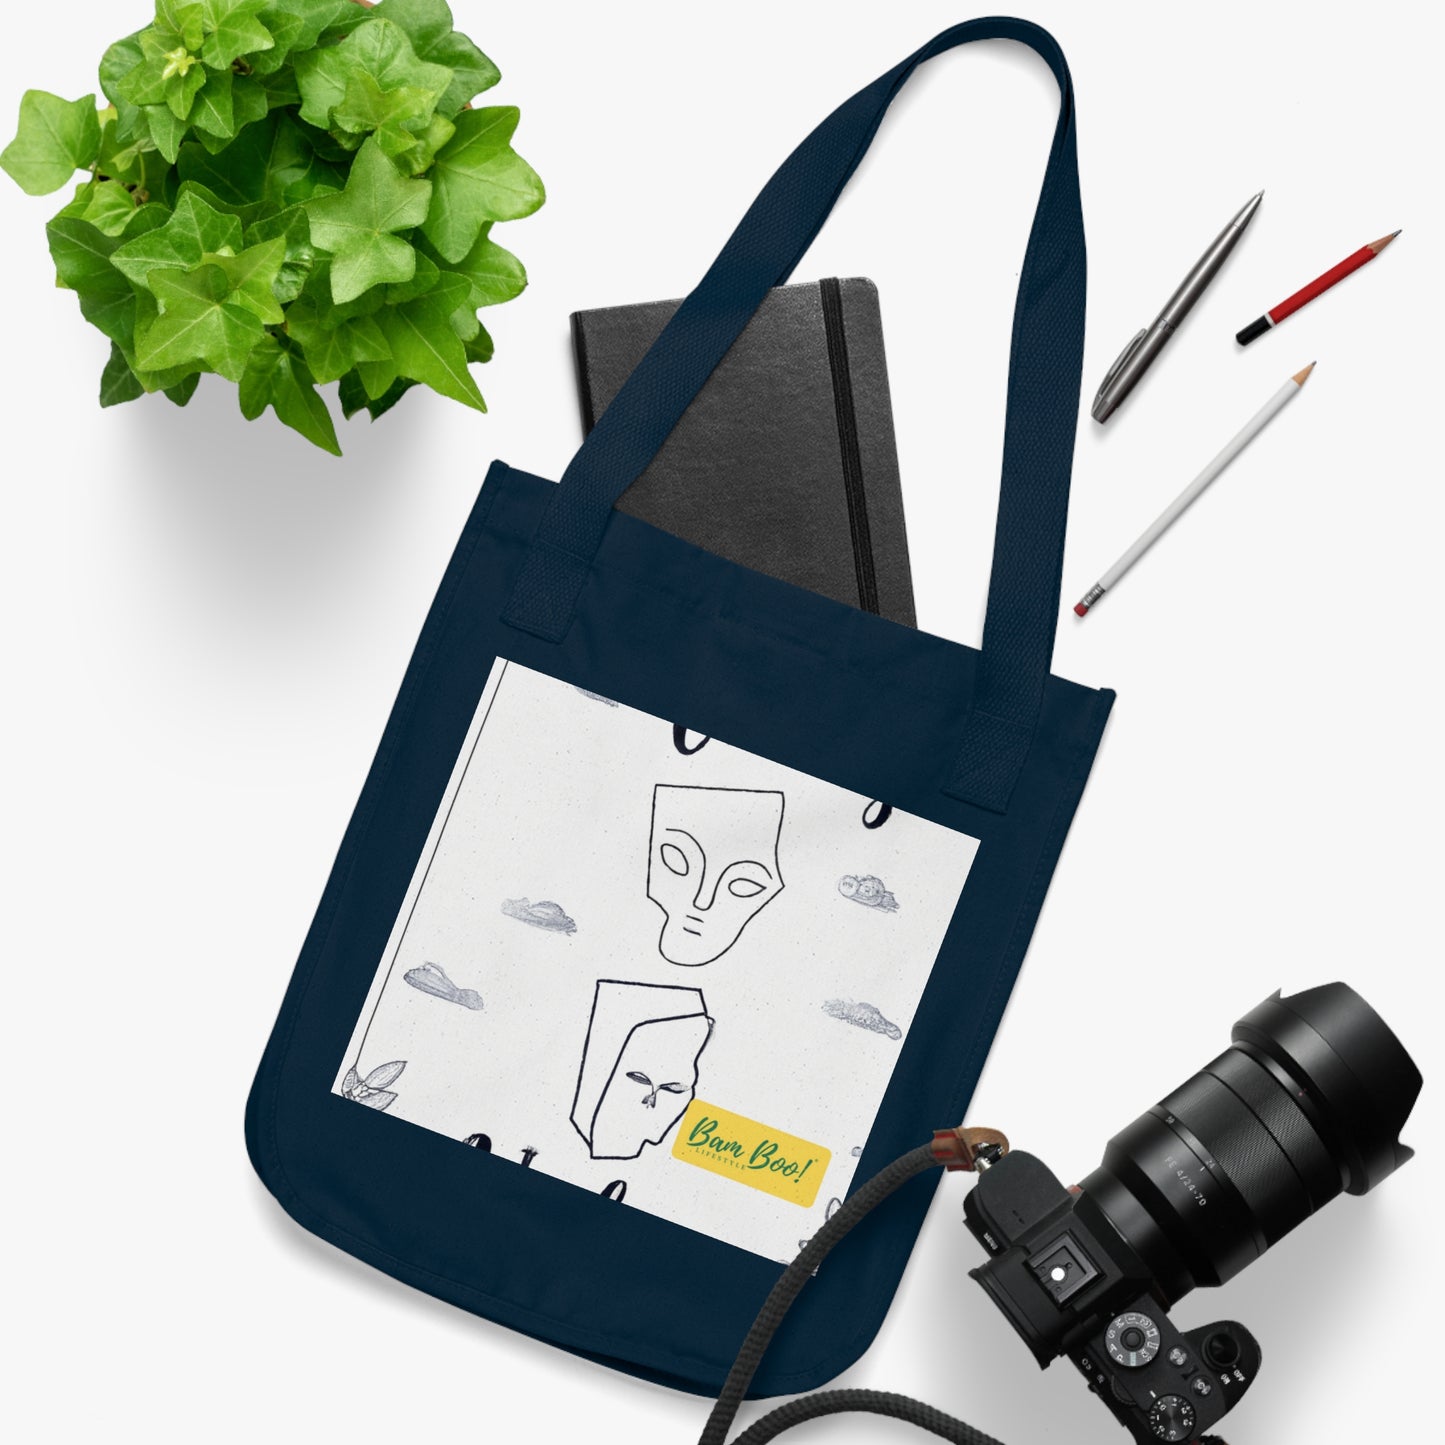 "My Reflection through 2020: A Visual Story" - Bam Boo! Lifestyle Eco-friendly Tote Bag